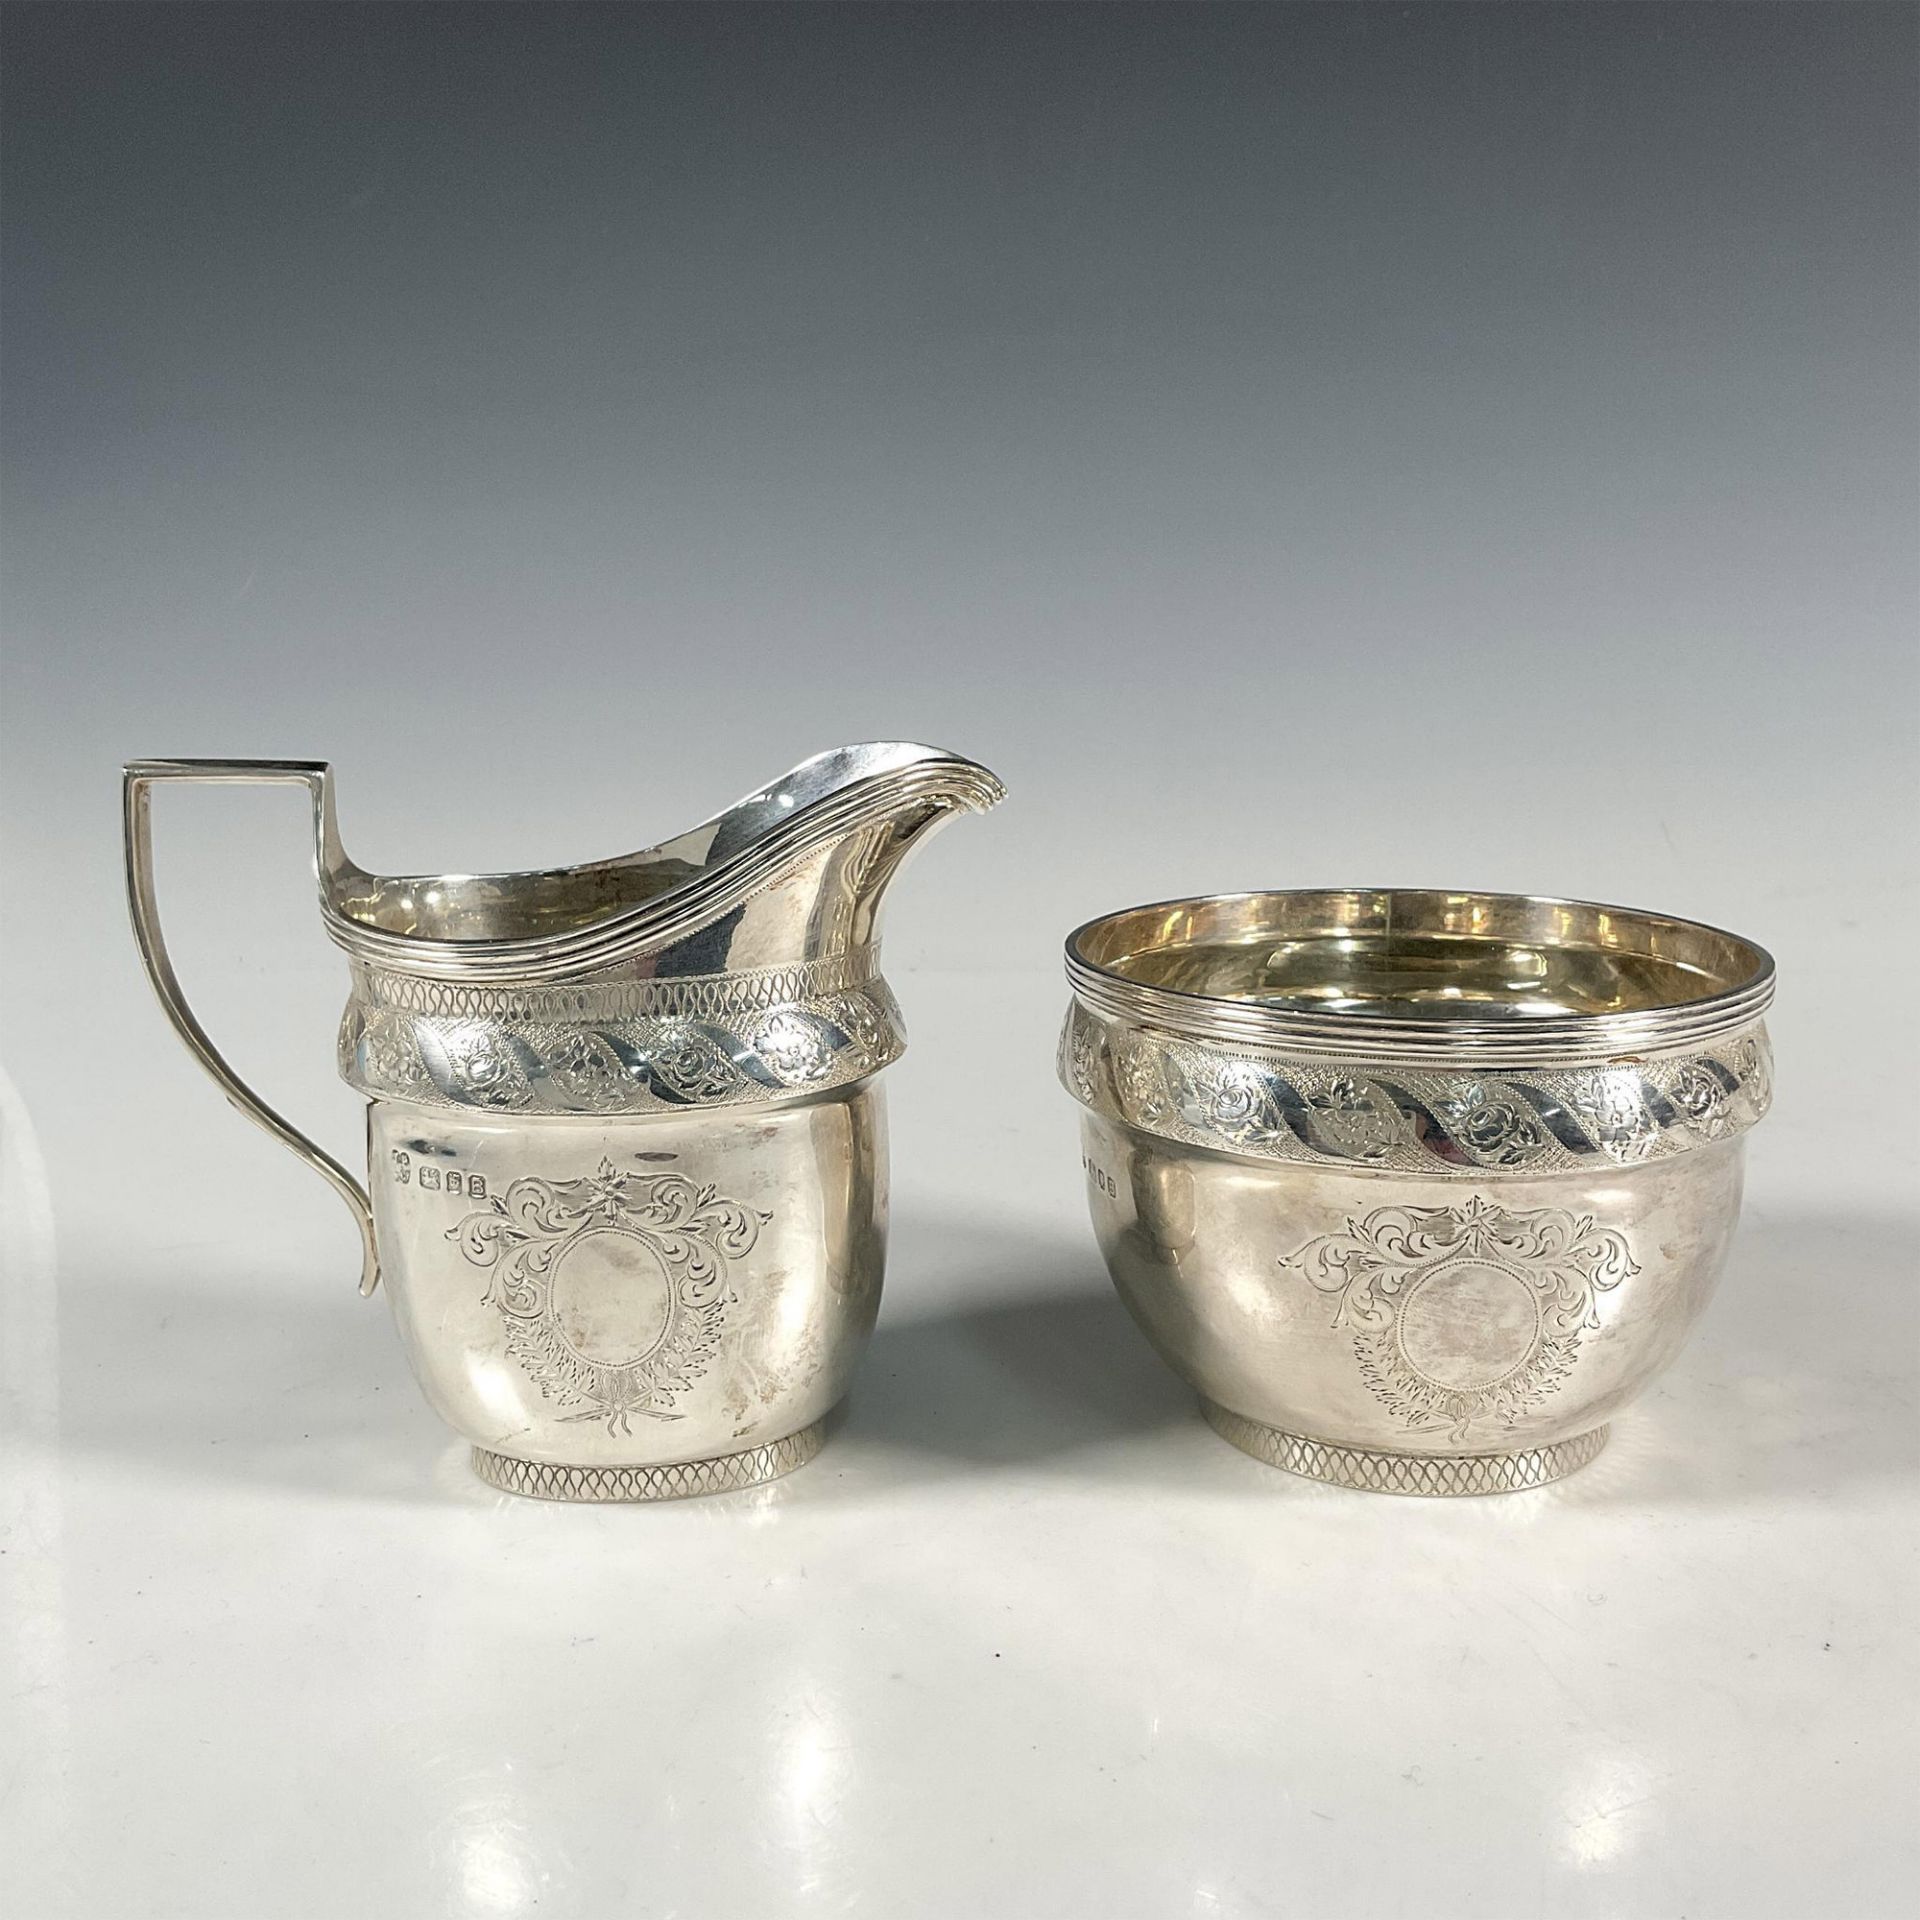 2 Silver Royal Gifts For Prince William of Gloucester - Image 2 of 3